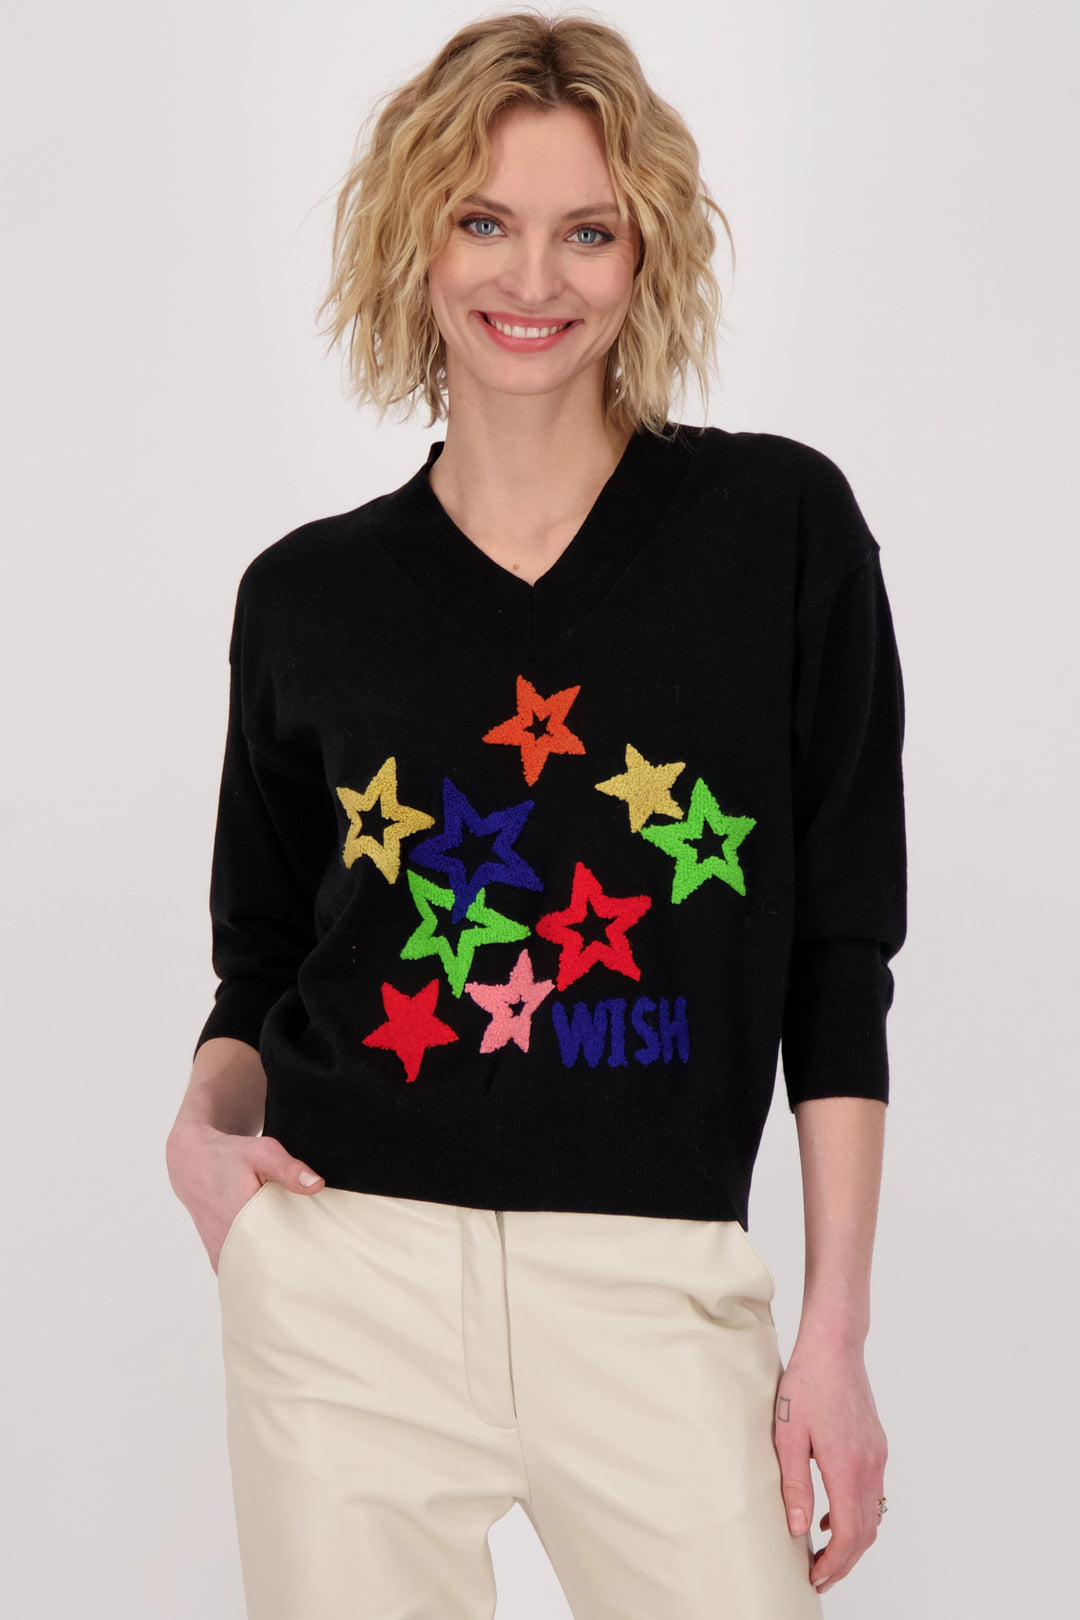 This v-neck sweater is comfy and decorated with colourful stars and a 'Wish' print on the front, making it the perfect item for any night of stargazing this season.